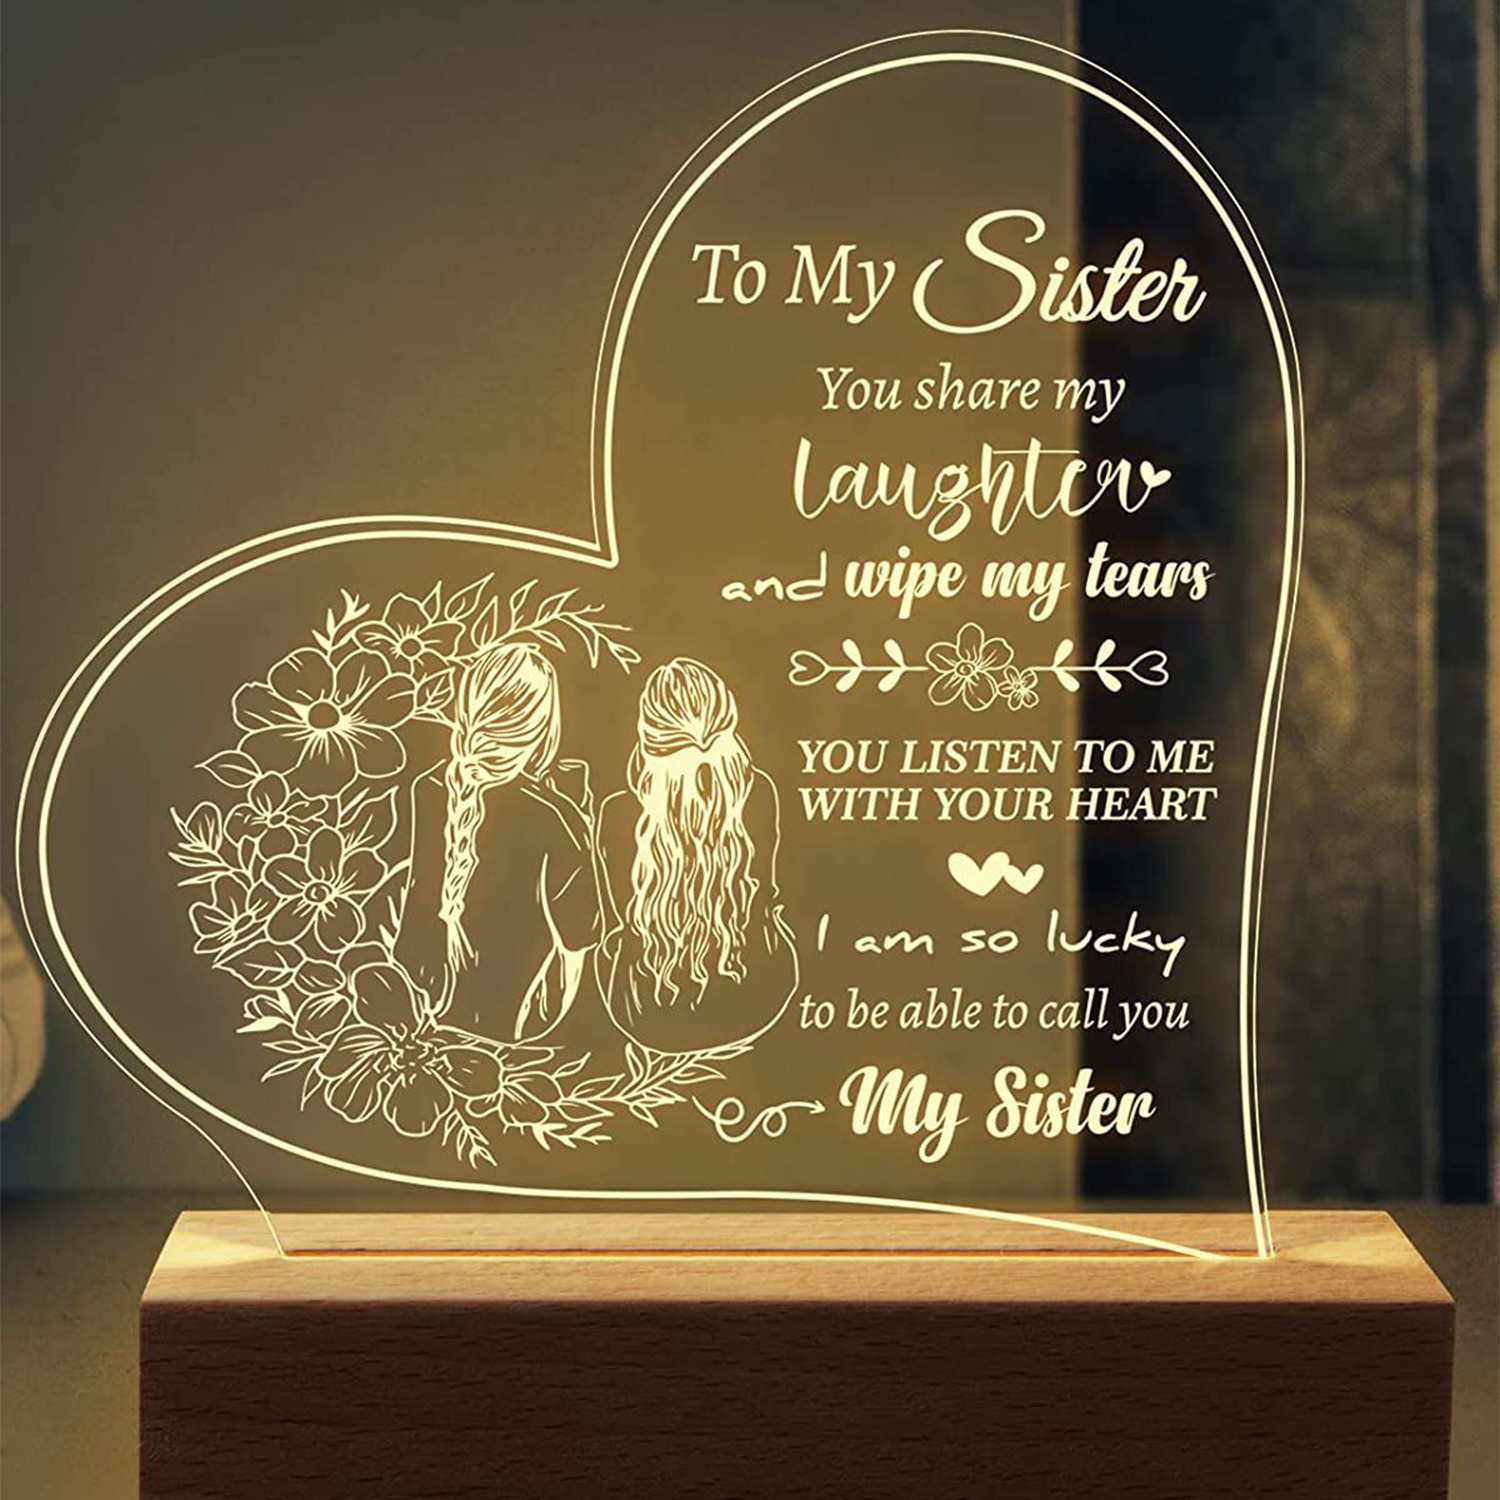 Sister Gifts - Sentimental Night Light for My Dear,Thoughtful